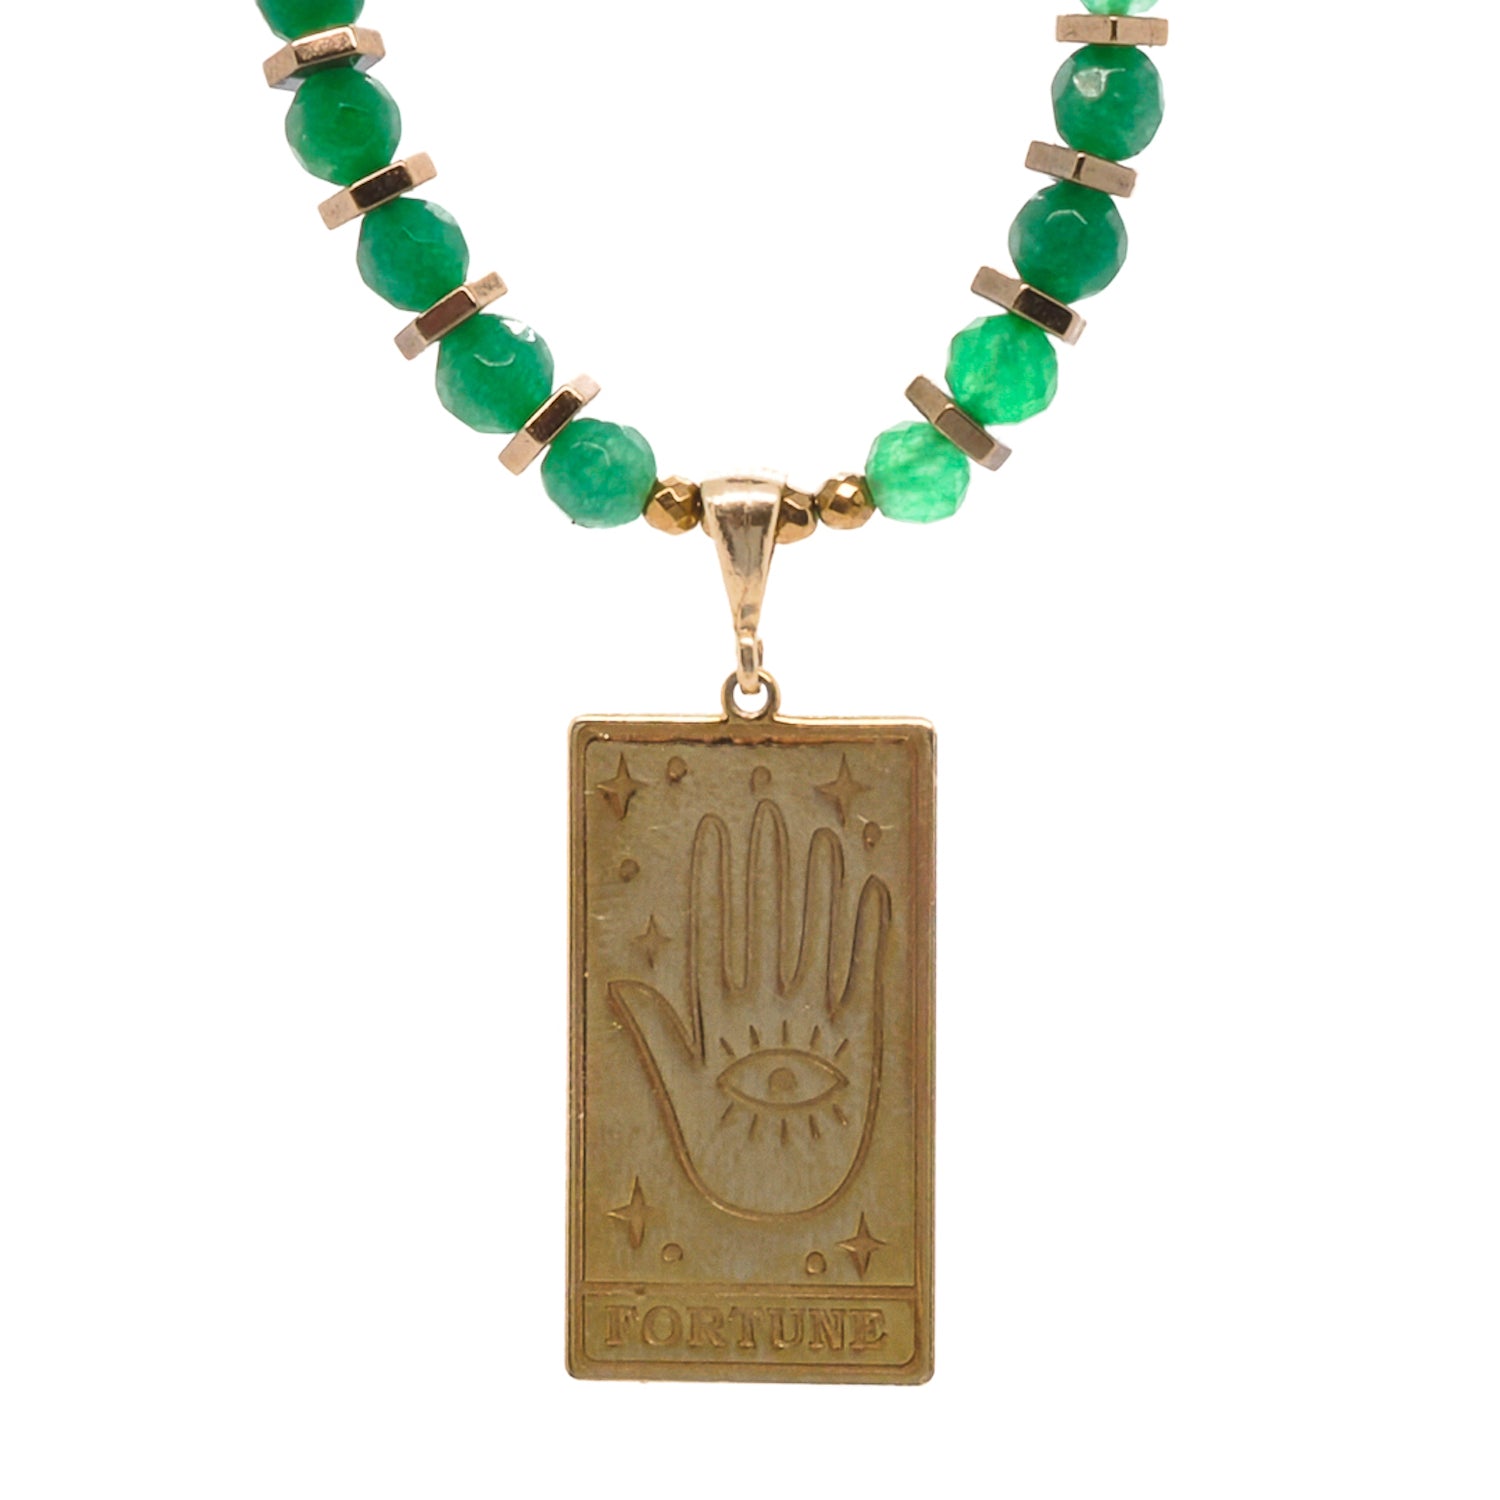 Good Fortune Tarot Necklace - A close-up view of the beautiful green jade beads and gold hematite heart beads on the Good Fortune Tarot Necklace, with the Tarot Fortune Card pendant shining in the center.